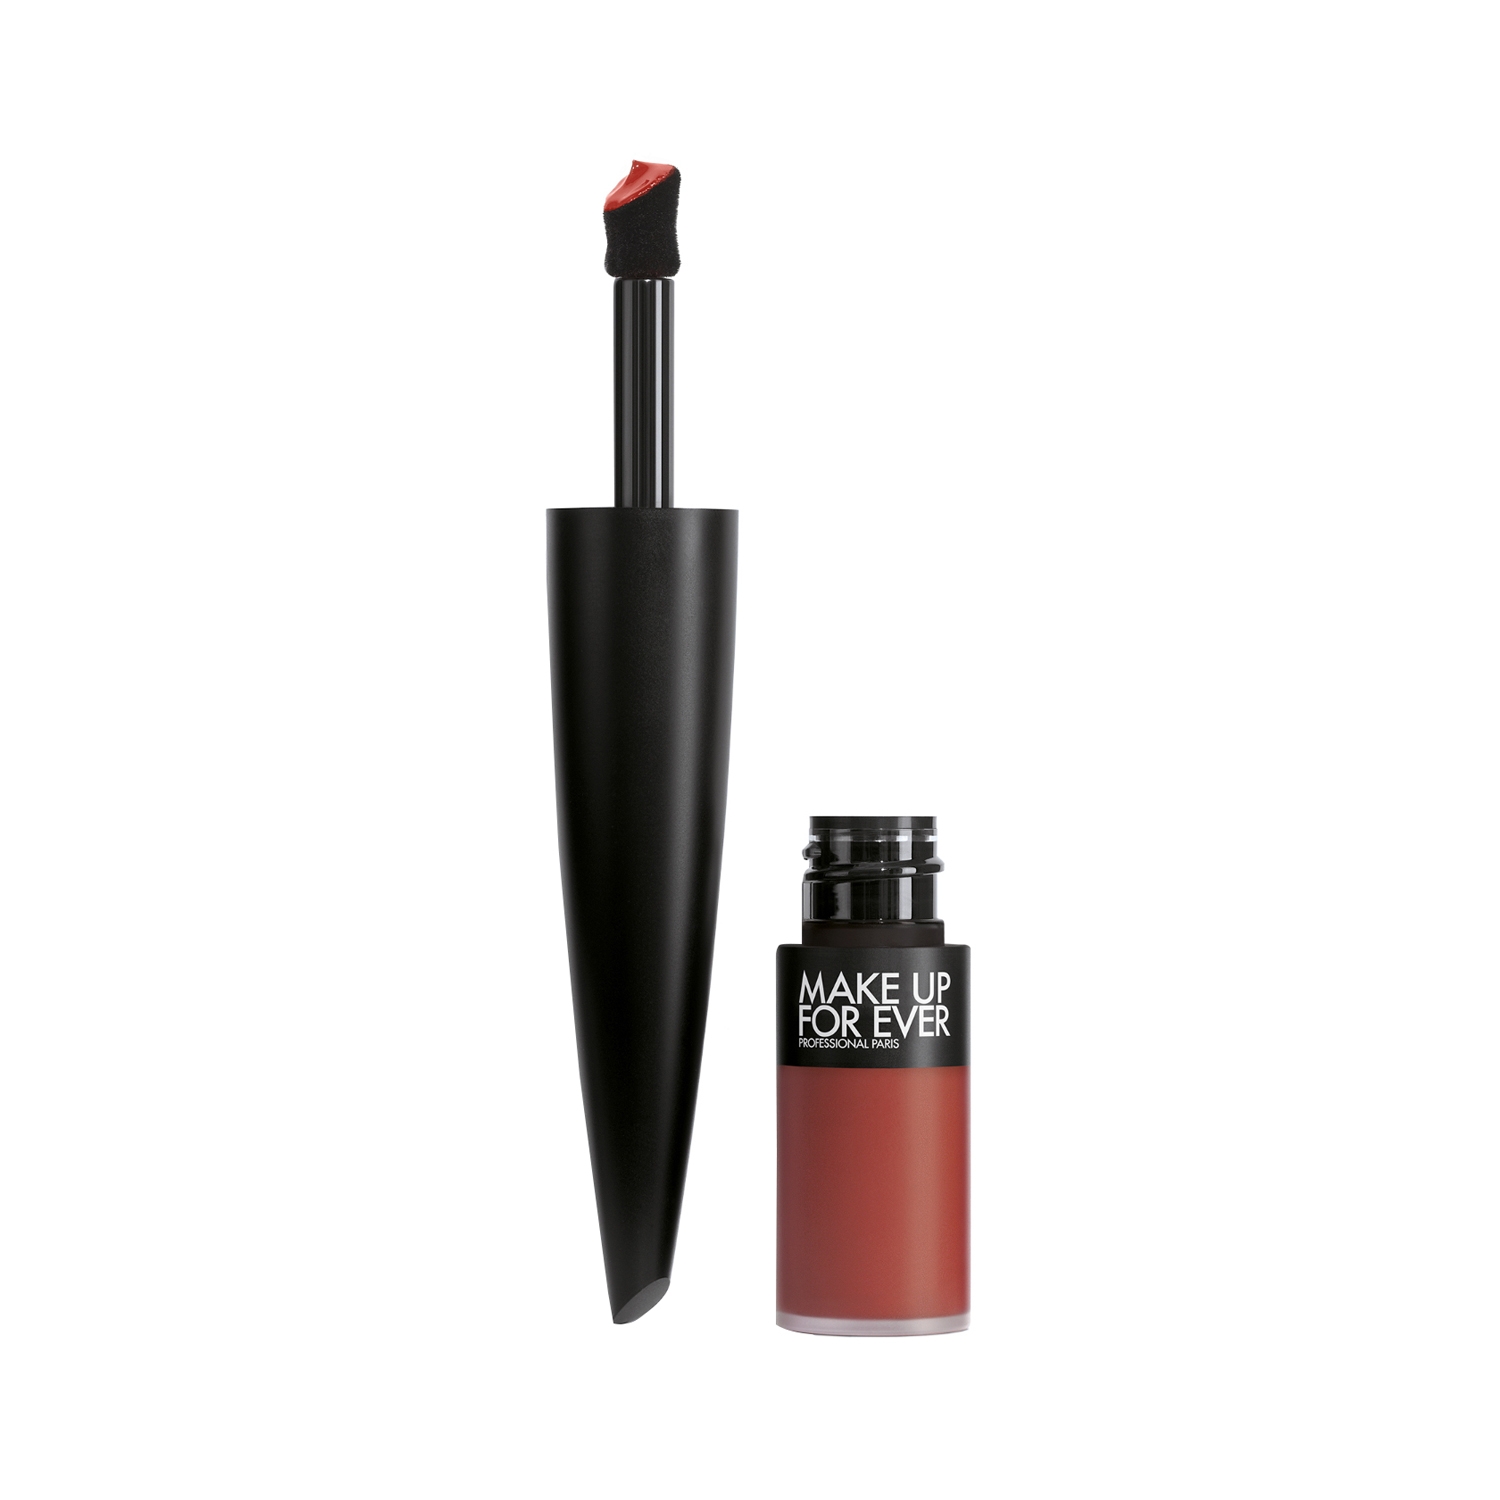 Make Up For Ever | Make Up for Ever Rouge Artist for Ever Matte Liquid Lipstick- Goji All the Time 320 (4.5ml)